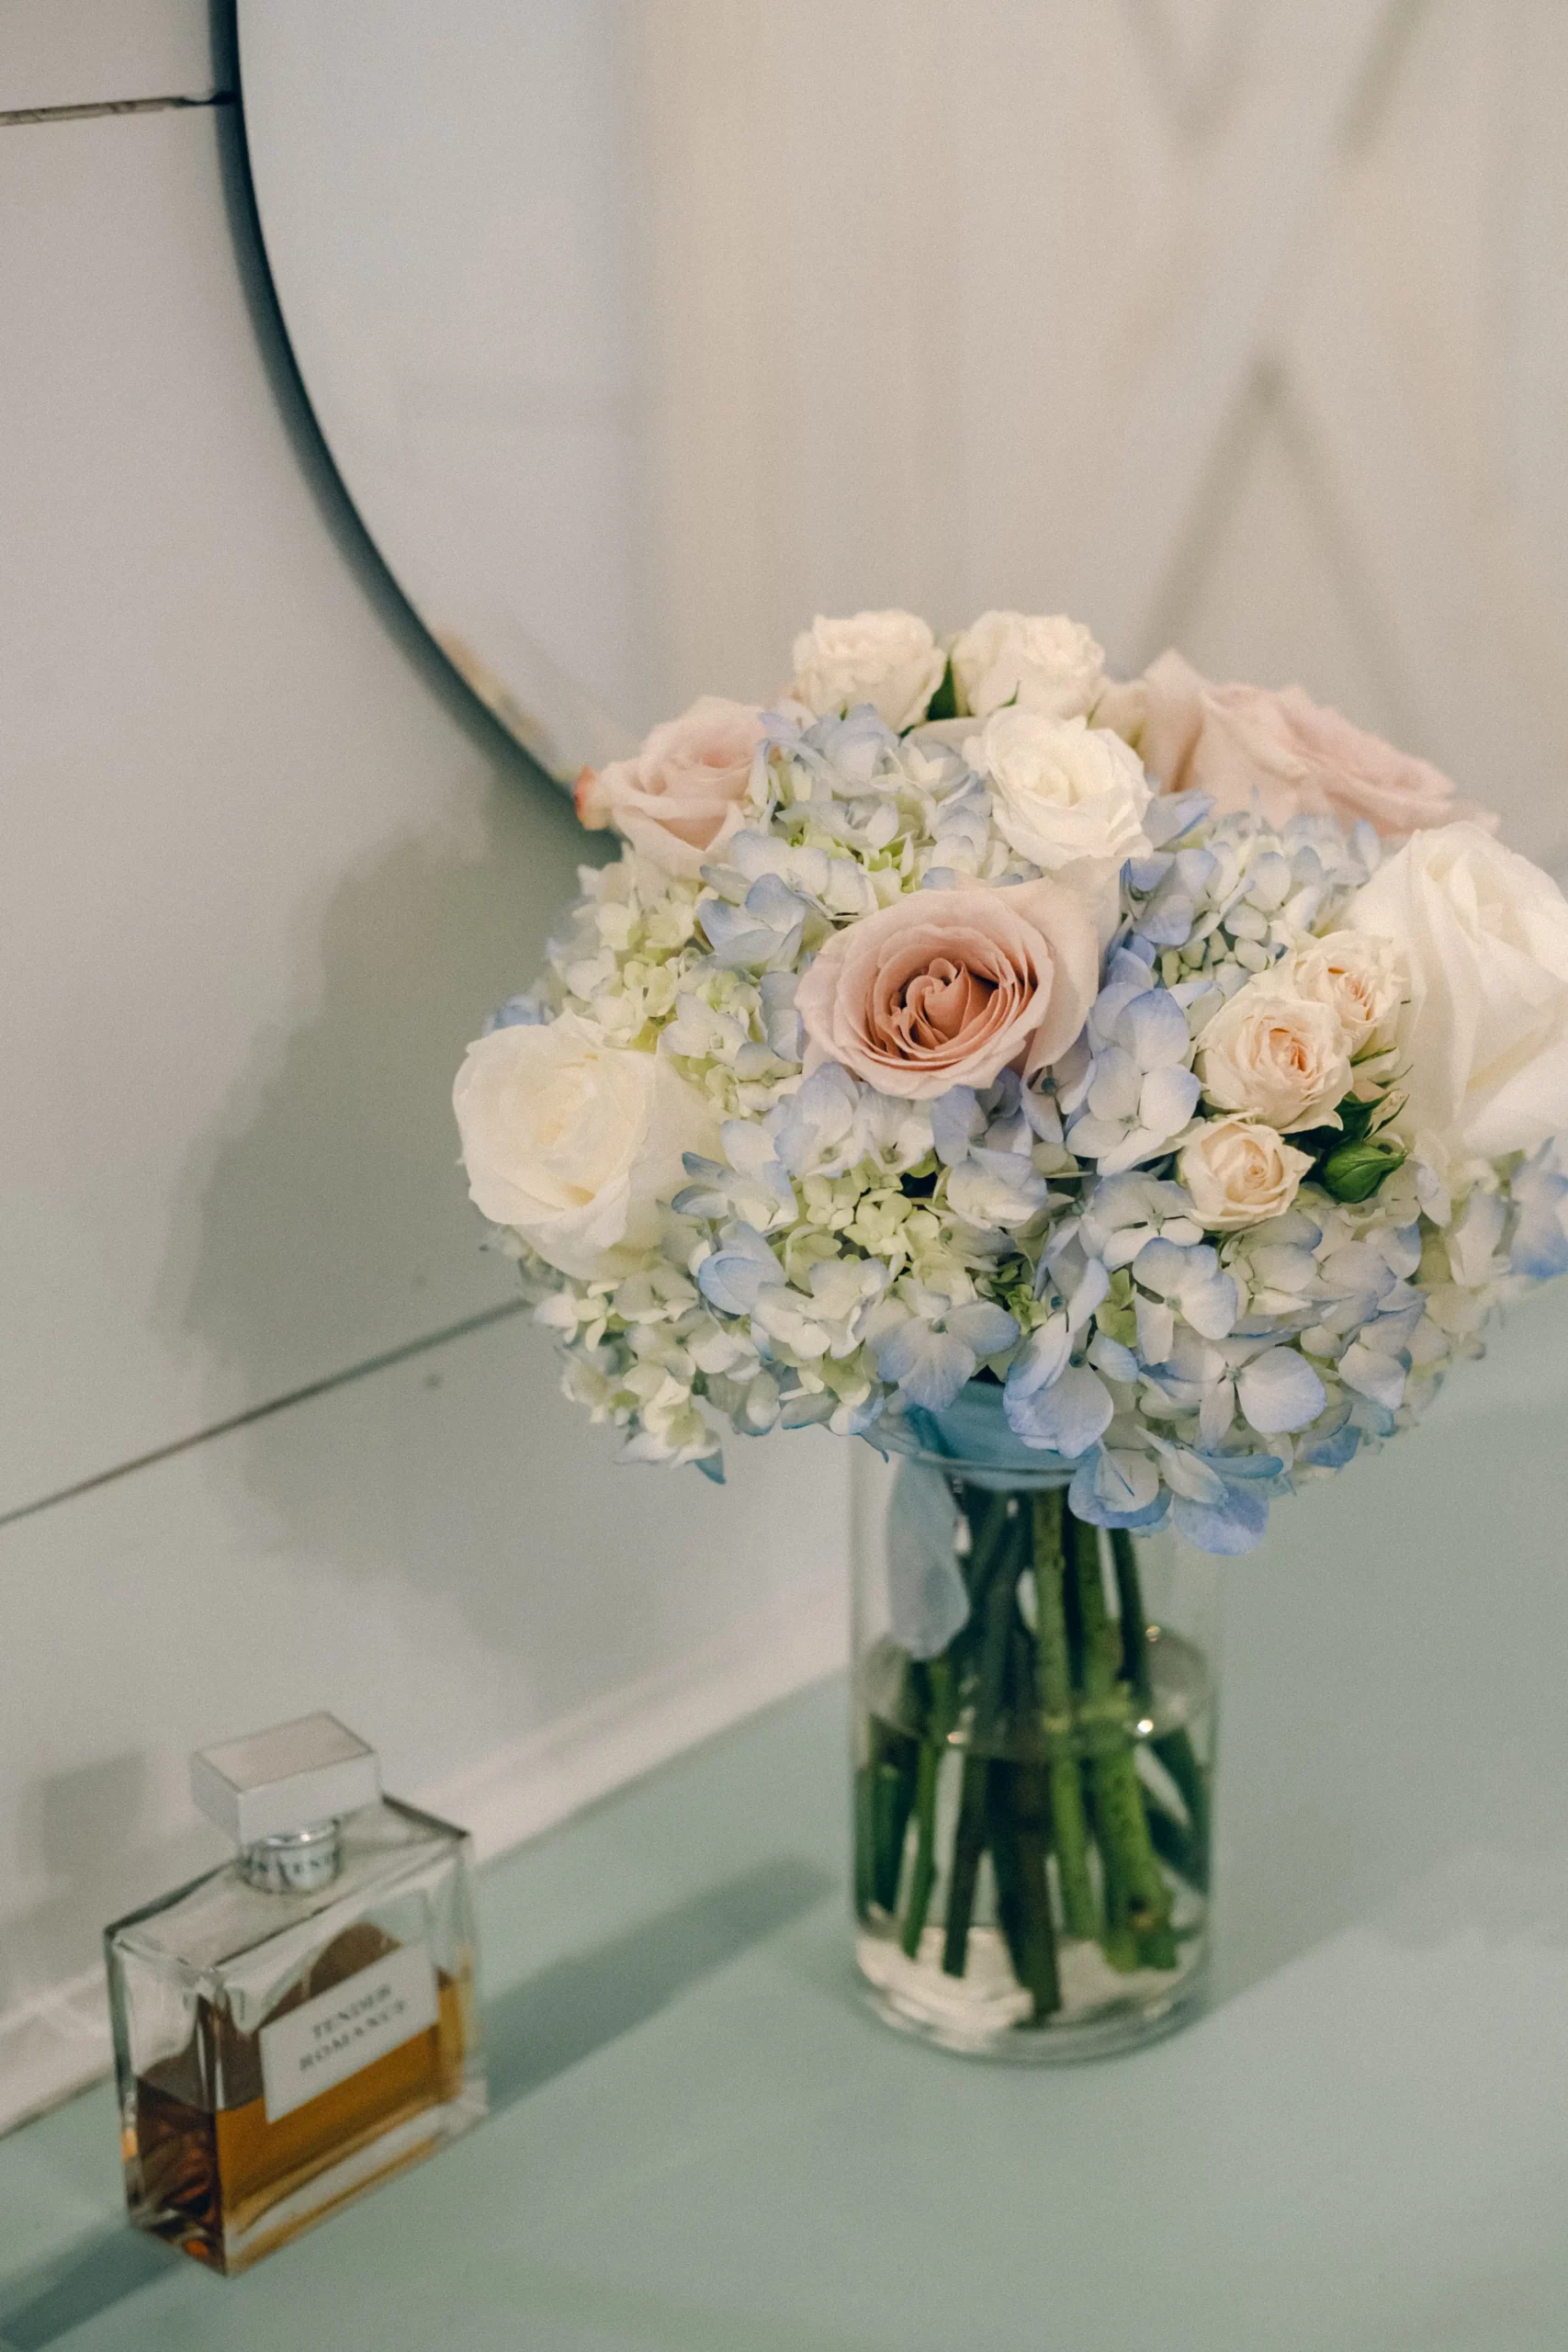 a detail image of the bride's bouquet full of hydrangeas and roses